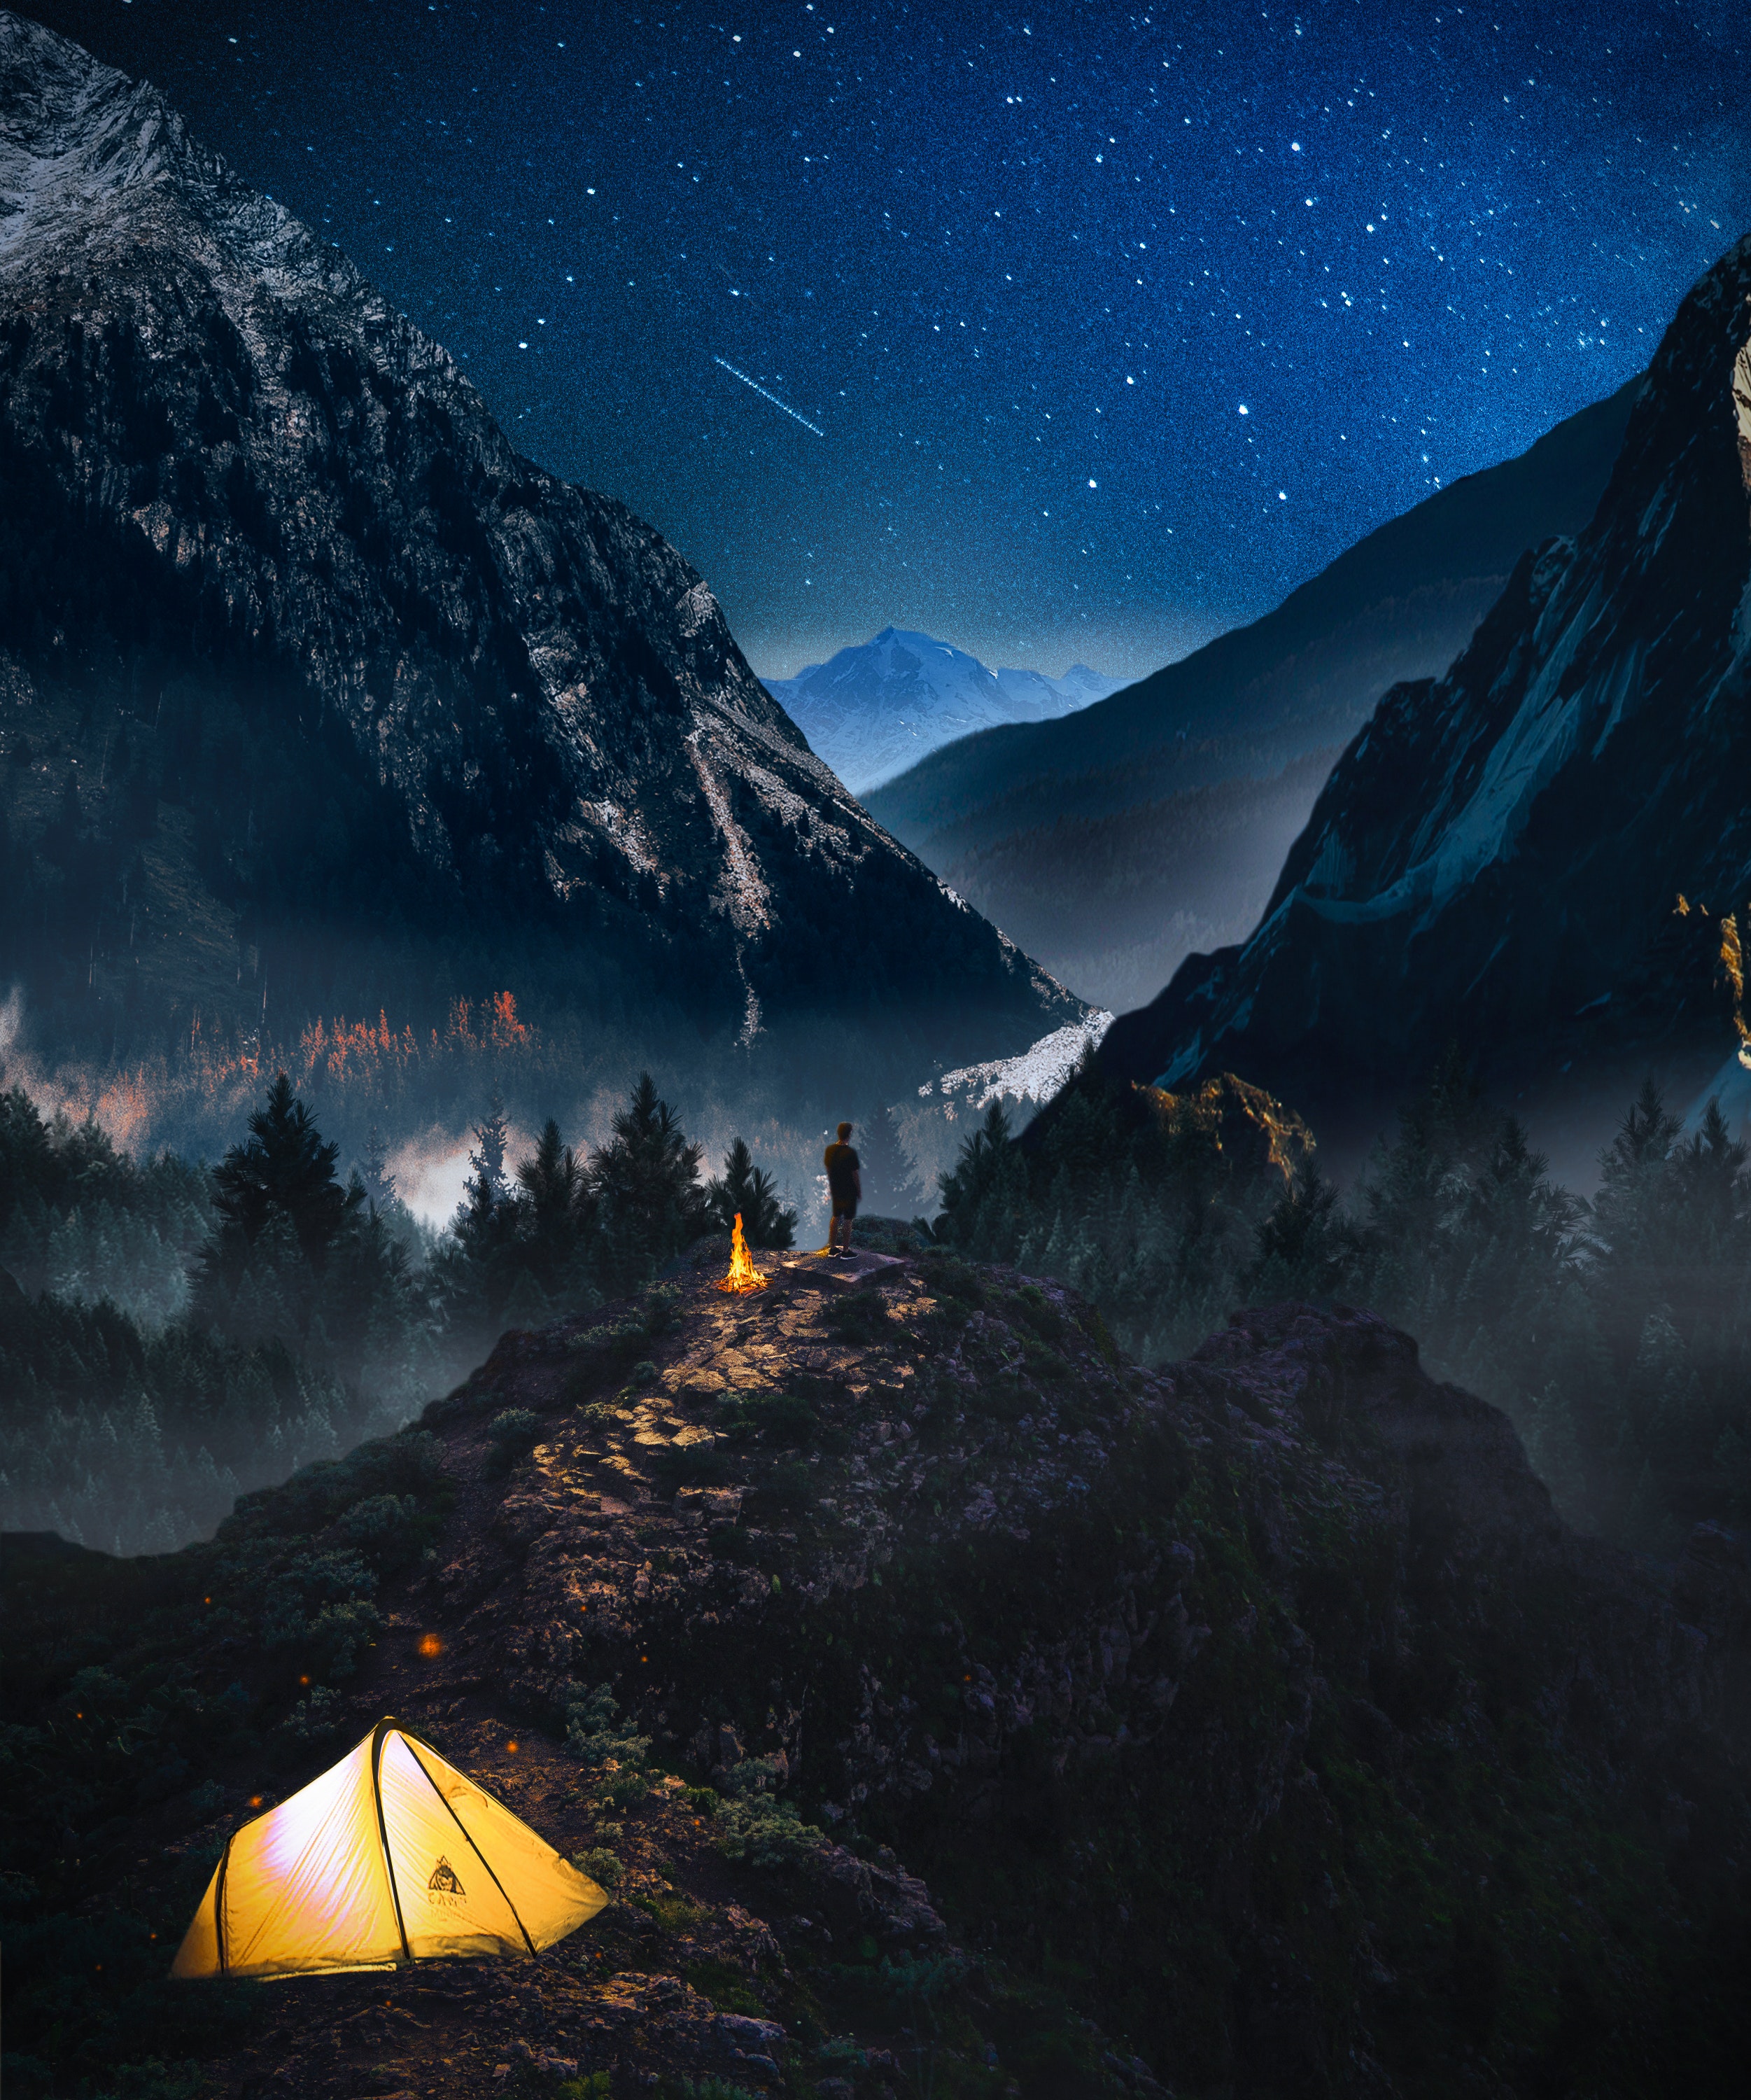 starry sky, camping, loneliness, photoshop, campsite, mountains, nature UHD